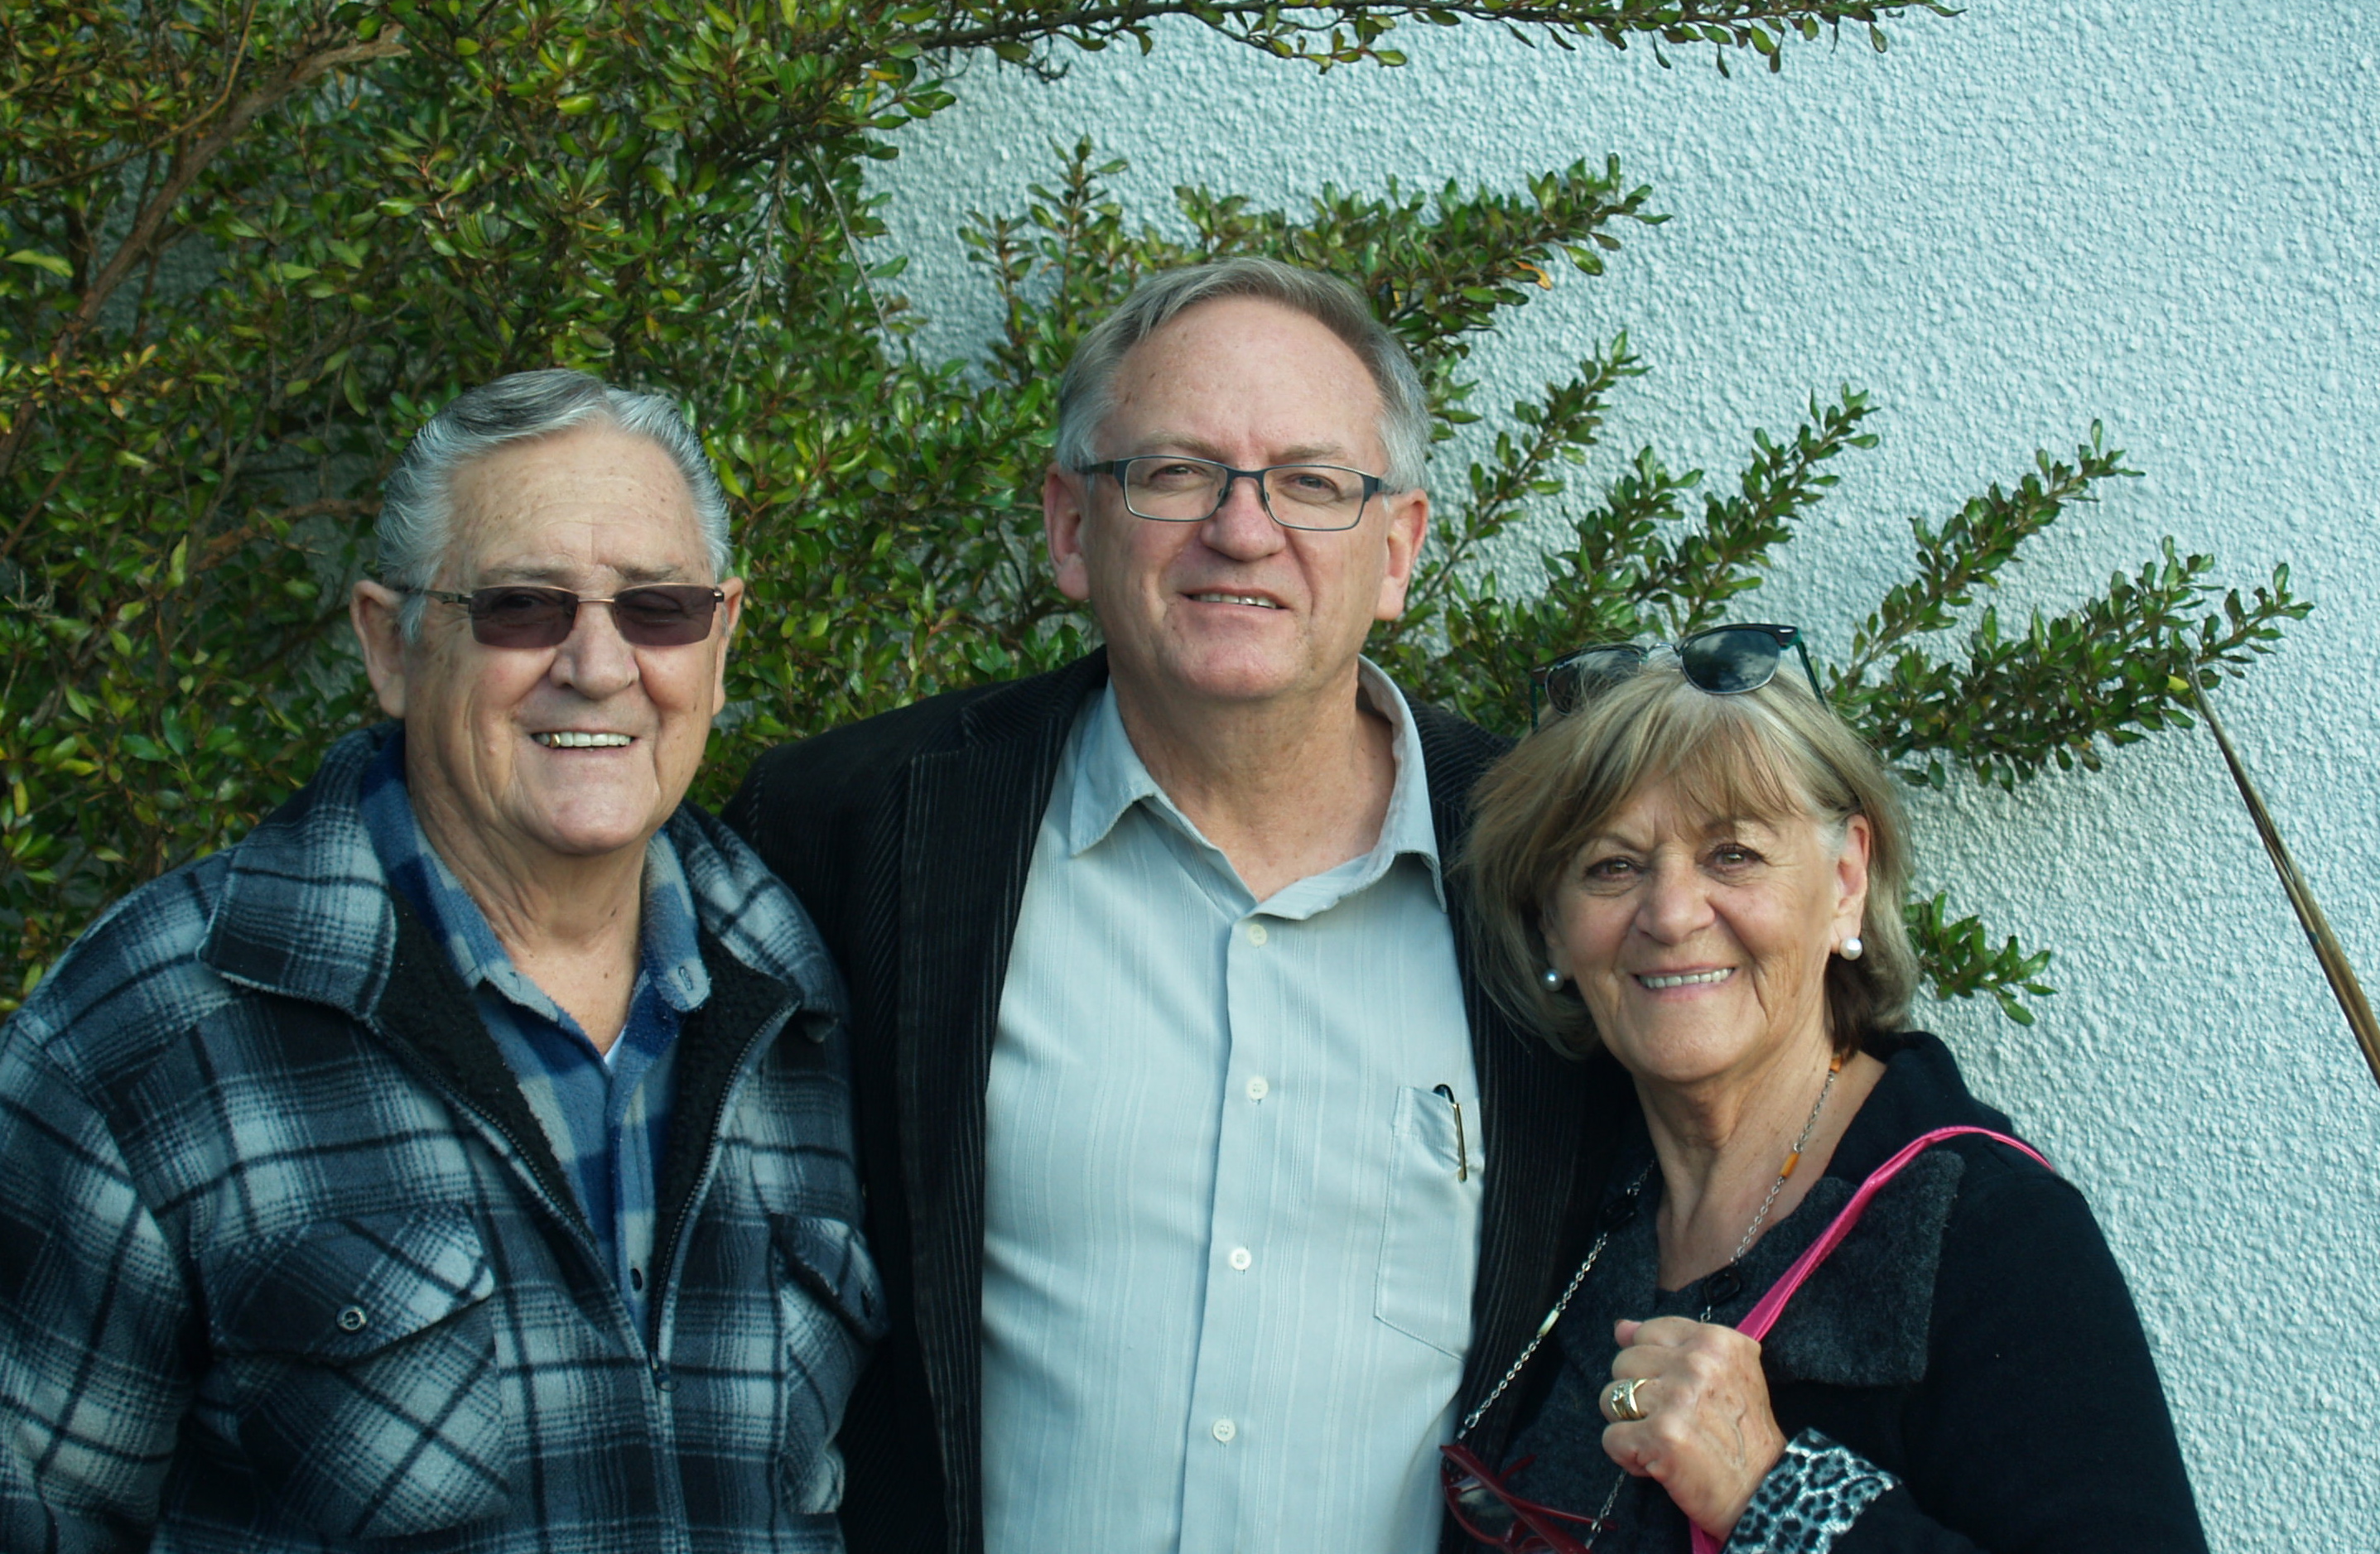 William (eldest son) centre with mum Nena right and dad Charles left. Credit: W van Zyl. The photo was taken in April 2015 (New Zealand) outside of Riverhaven, Huntly.